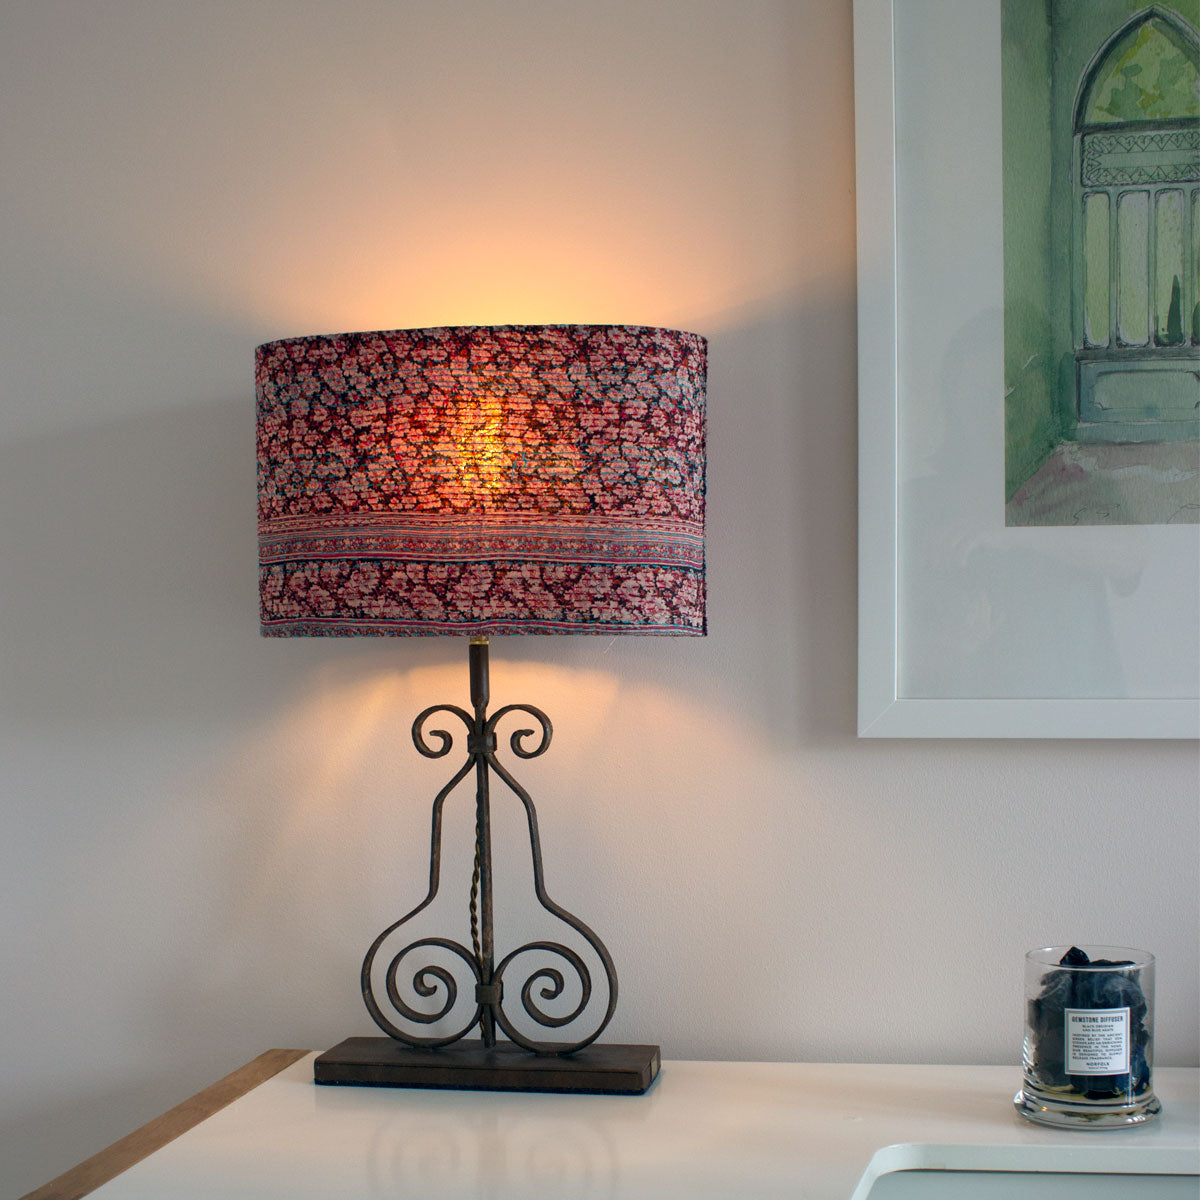 Table lamp Bela upcycled from architectural salvage and Kantha lampshade